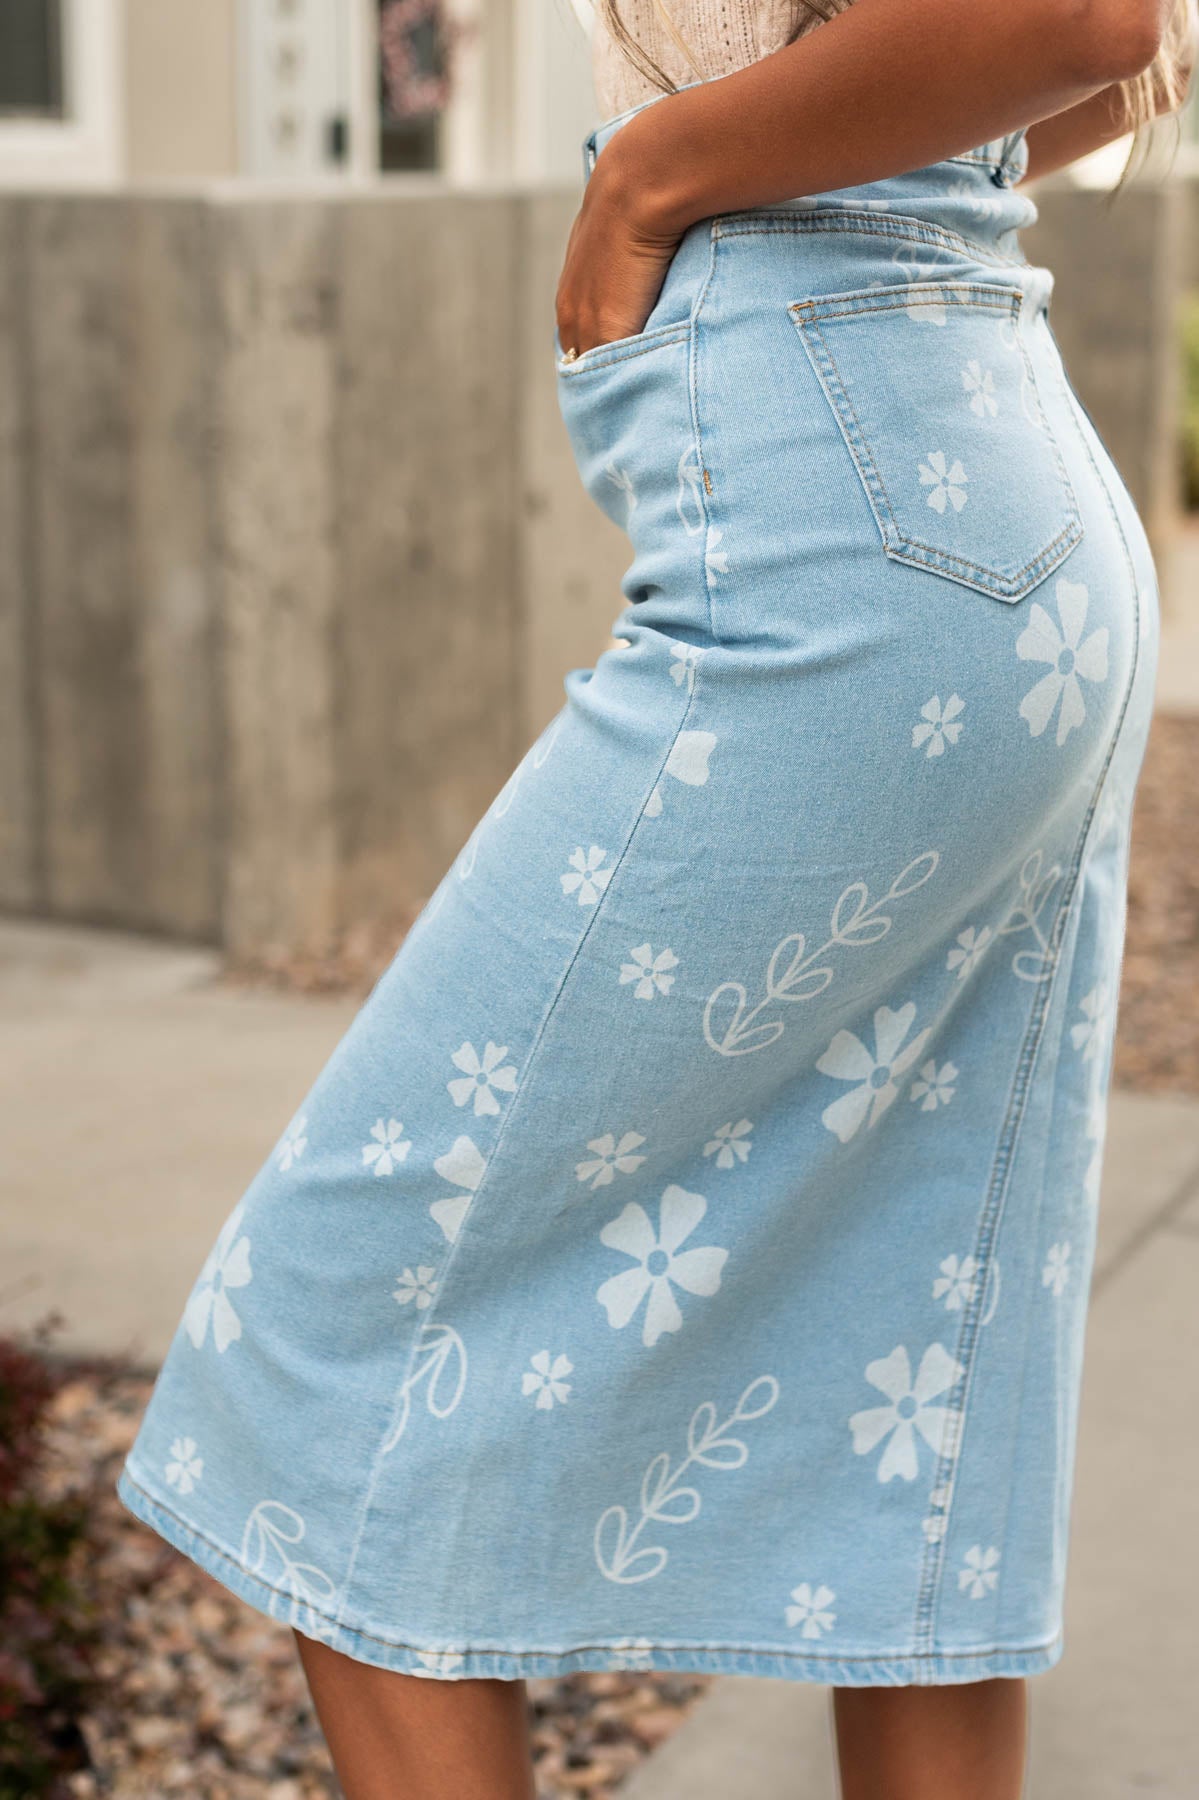 Side view of a denim skirt with white flowers